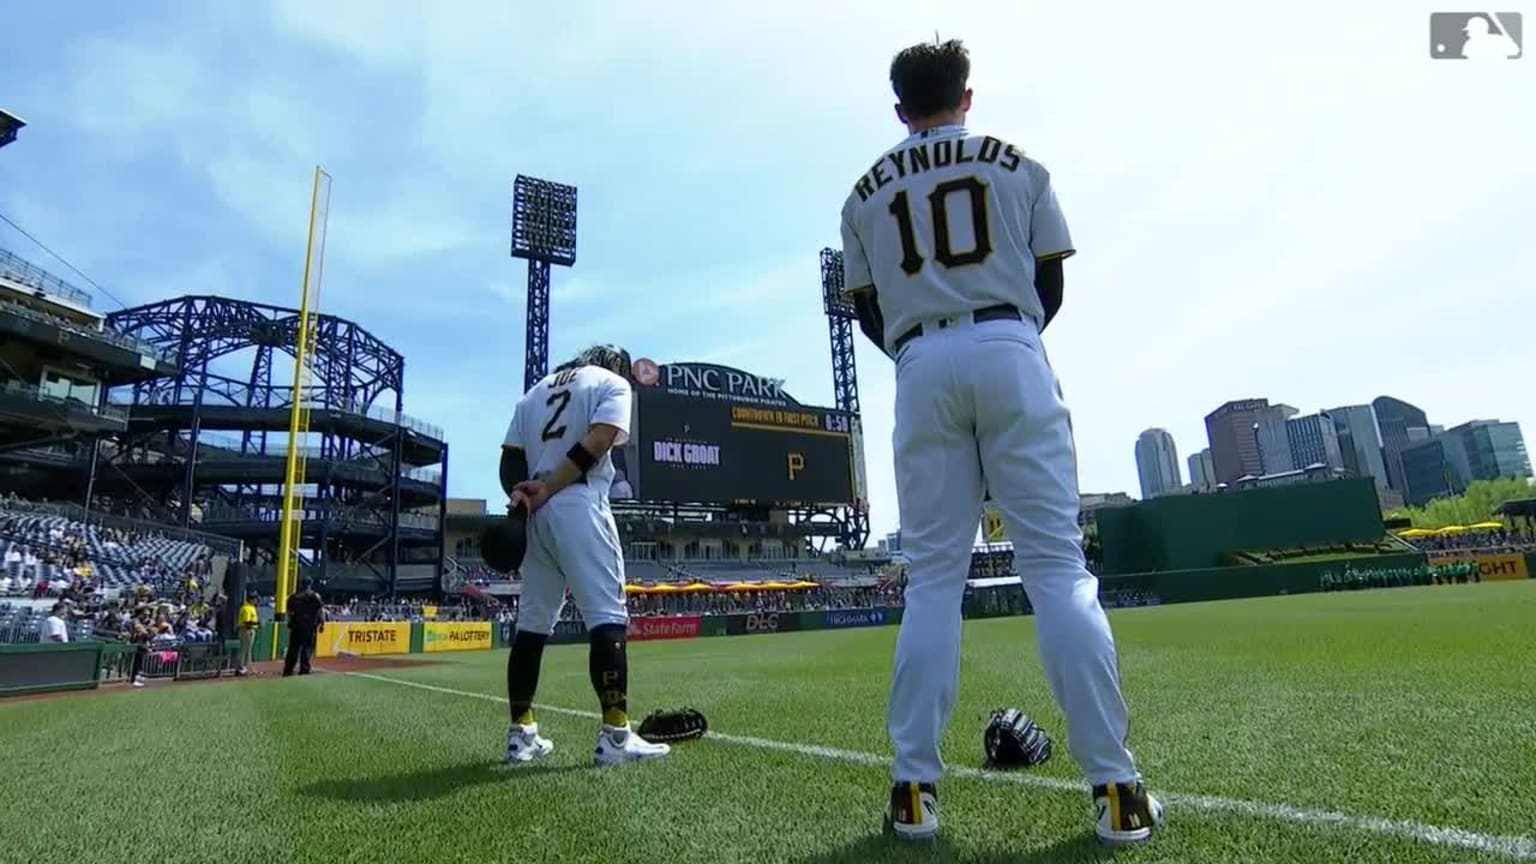 Tigers, Pirates Pay Tribute with Negro Leagues Uniforms